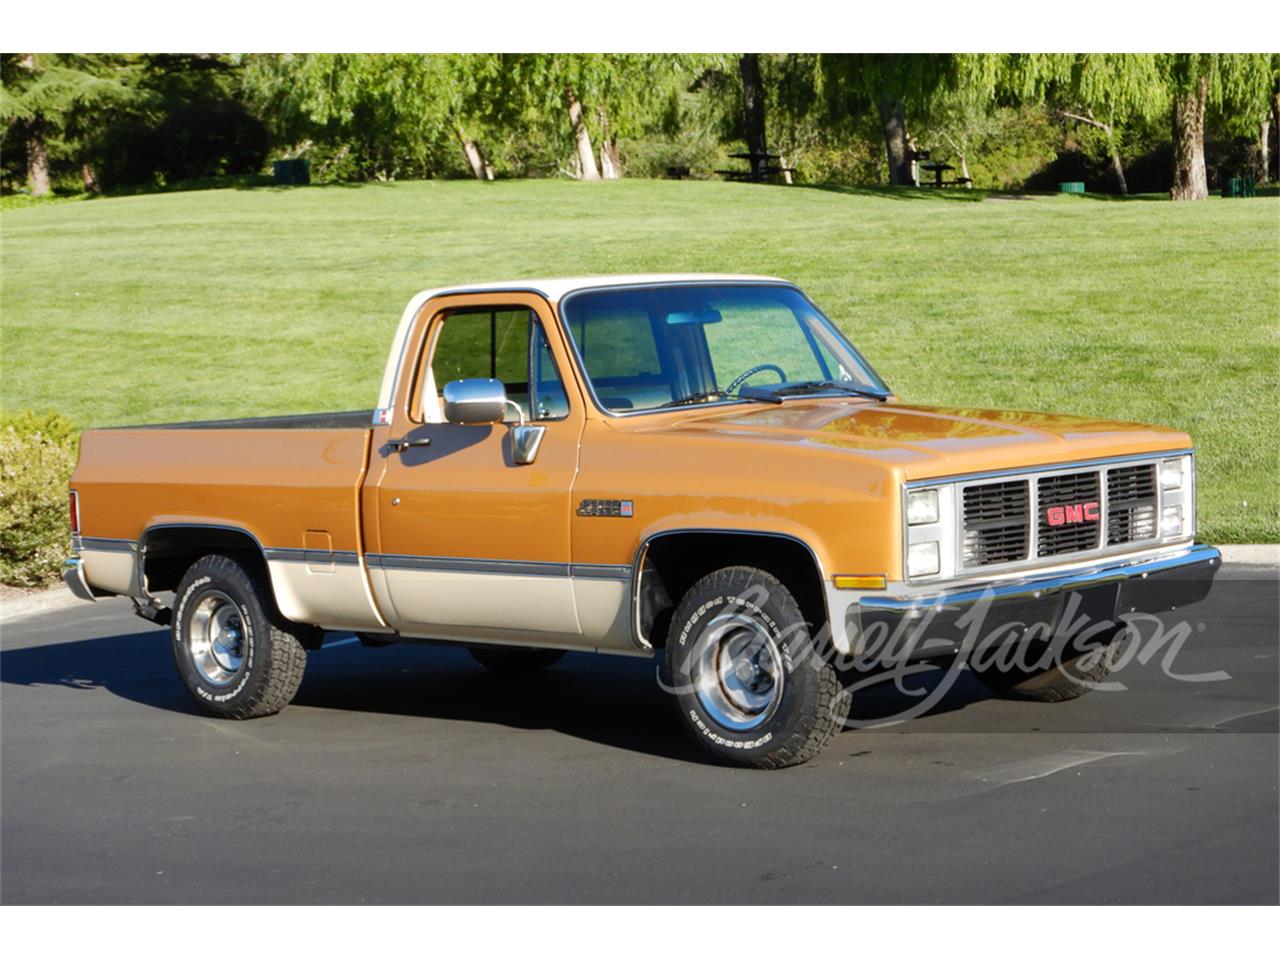 For Sale at Auction: 1985 GMC Sierra 1500 in Scottsdale, Arizona for sale in Scottsdale, AZ